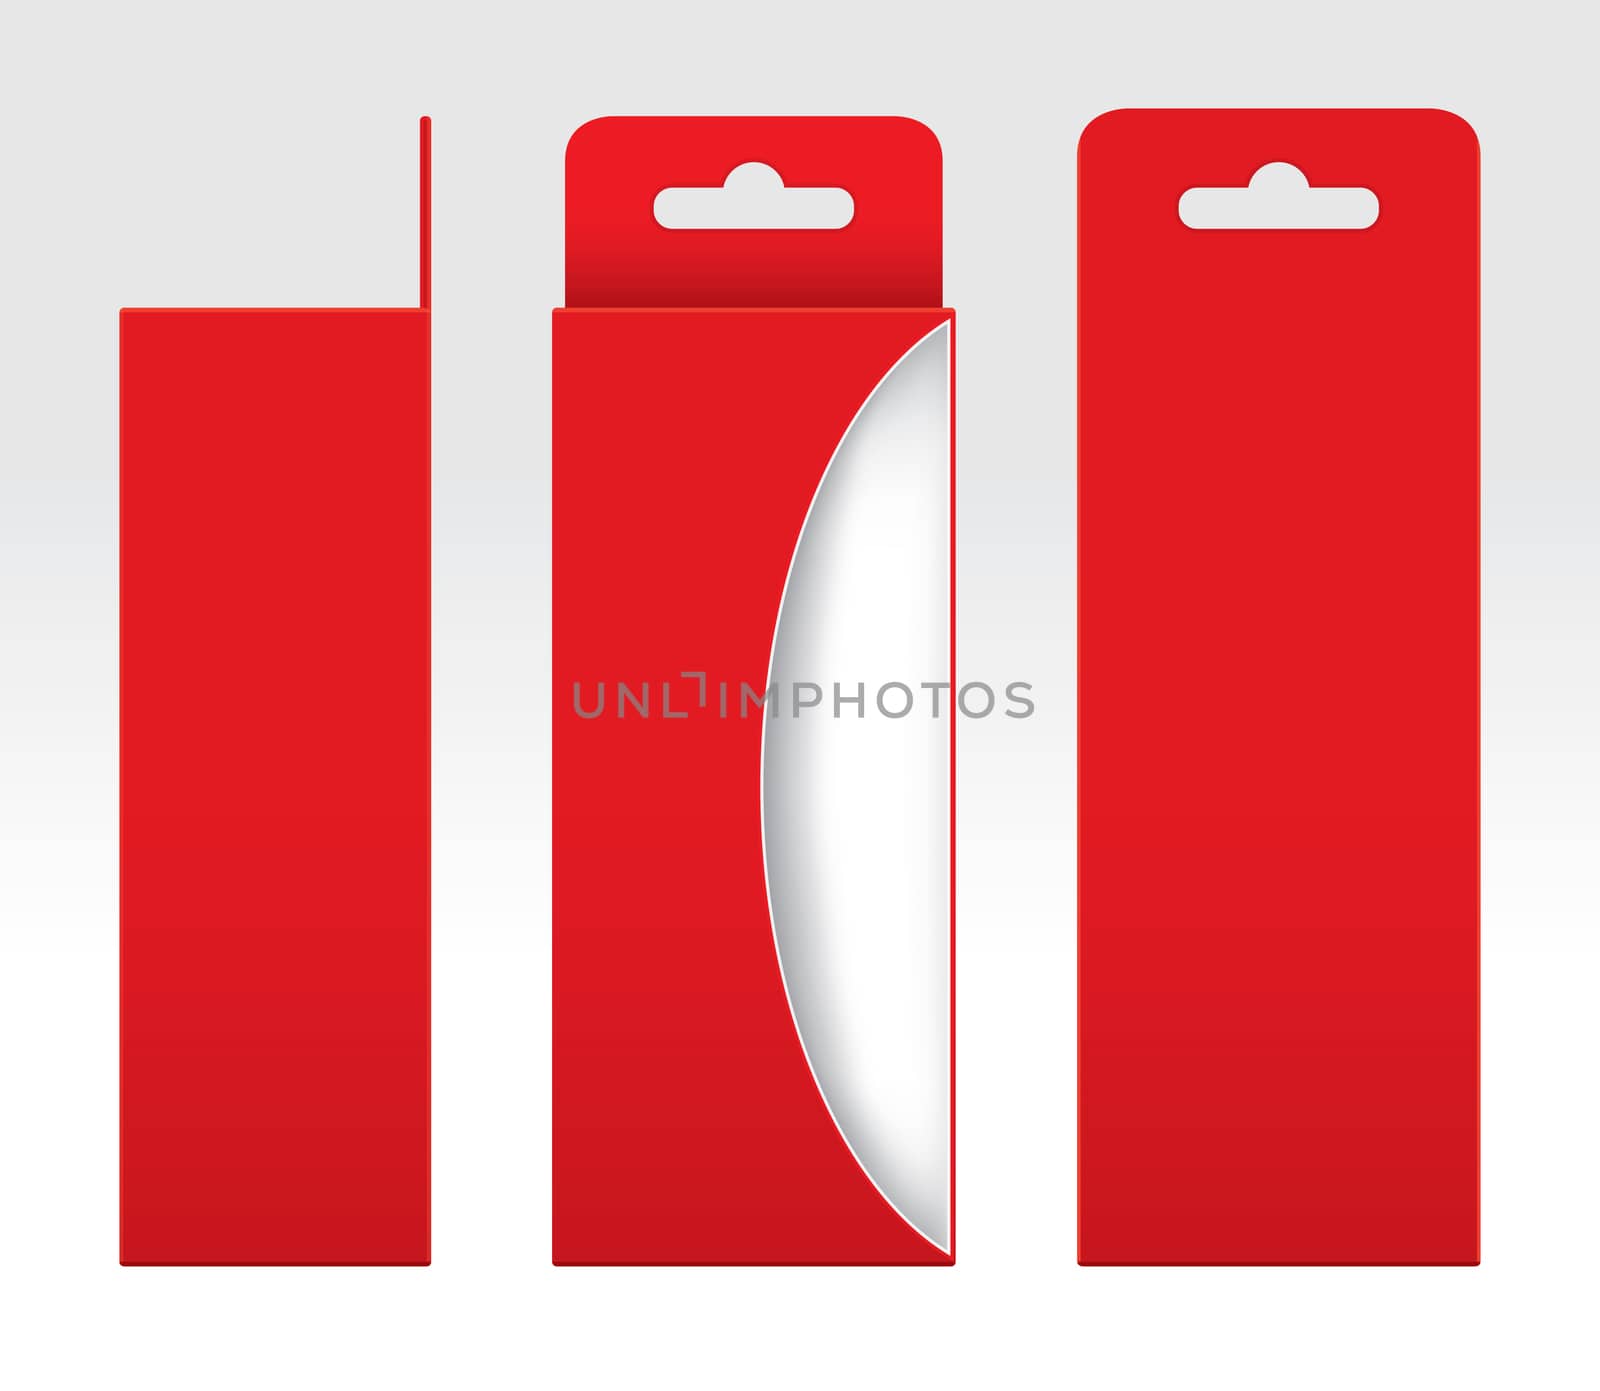 Hanging Red Box window cut out Packaging Template blank, Empty Box red Cardboard, Gift Boxes red kraft Package Carton, Premium red box empty